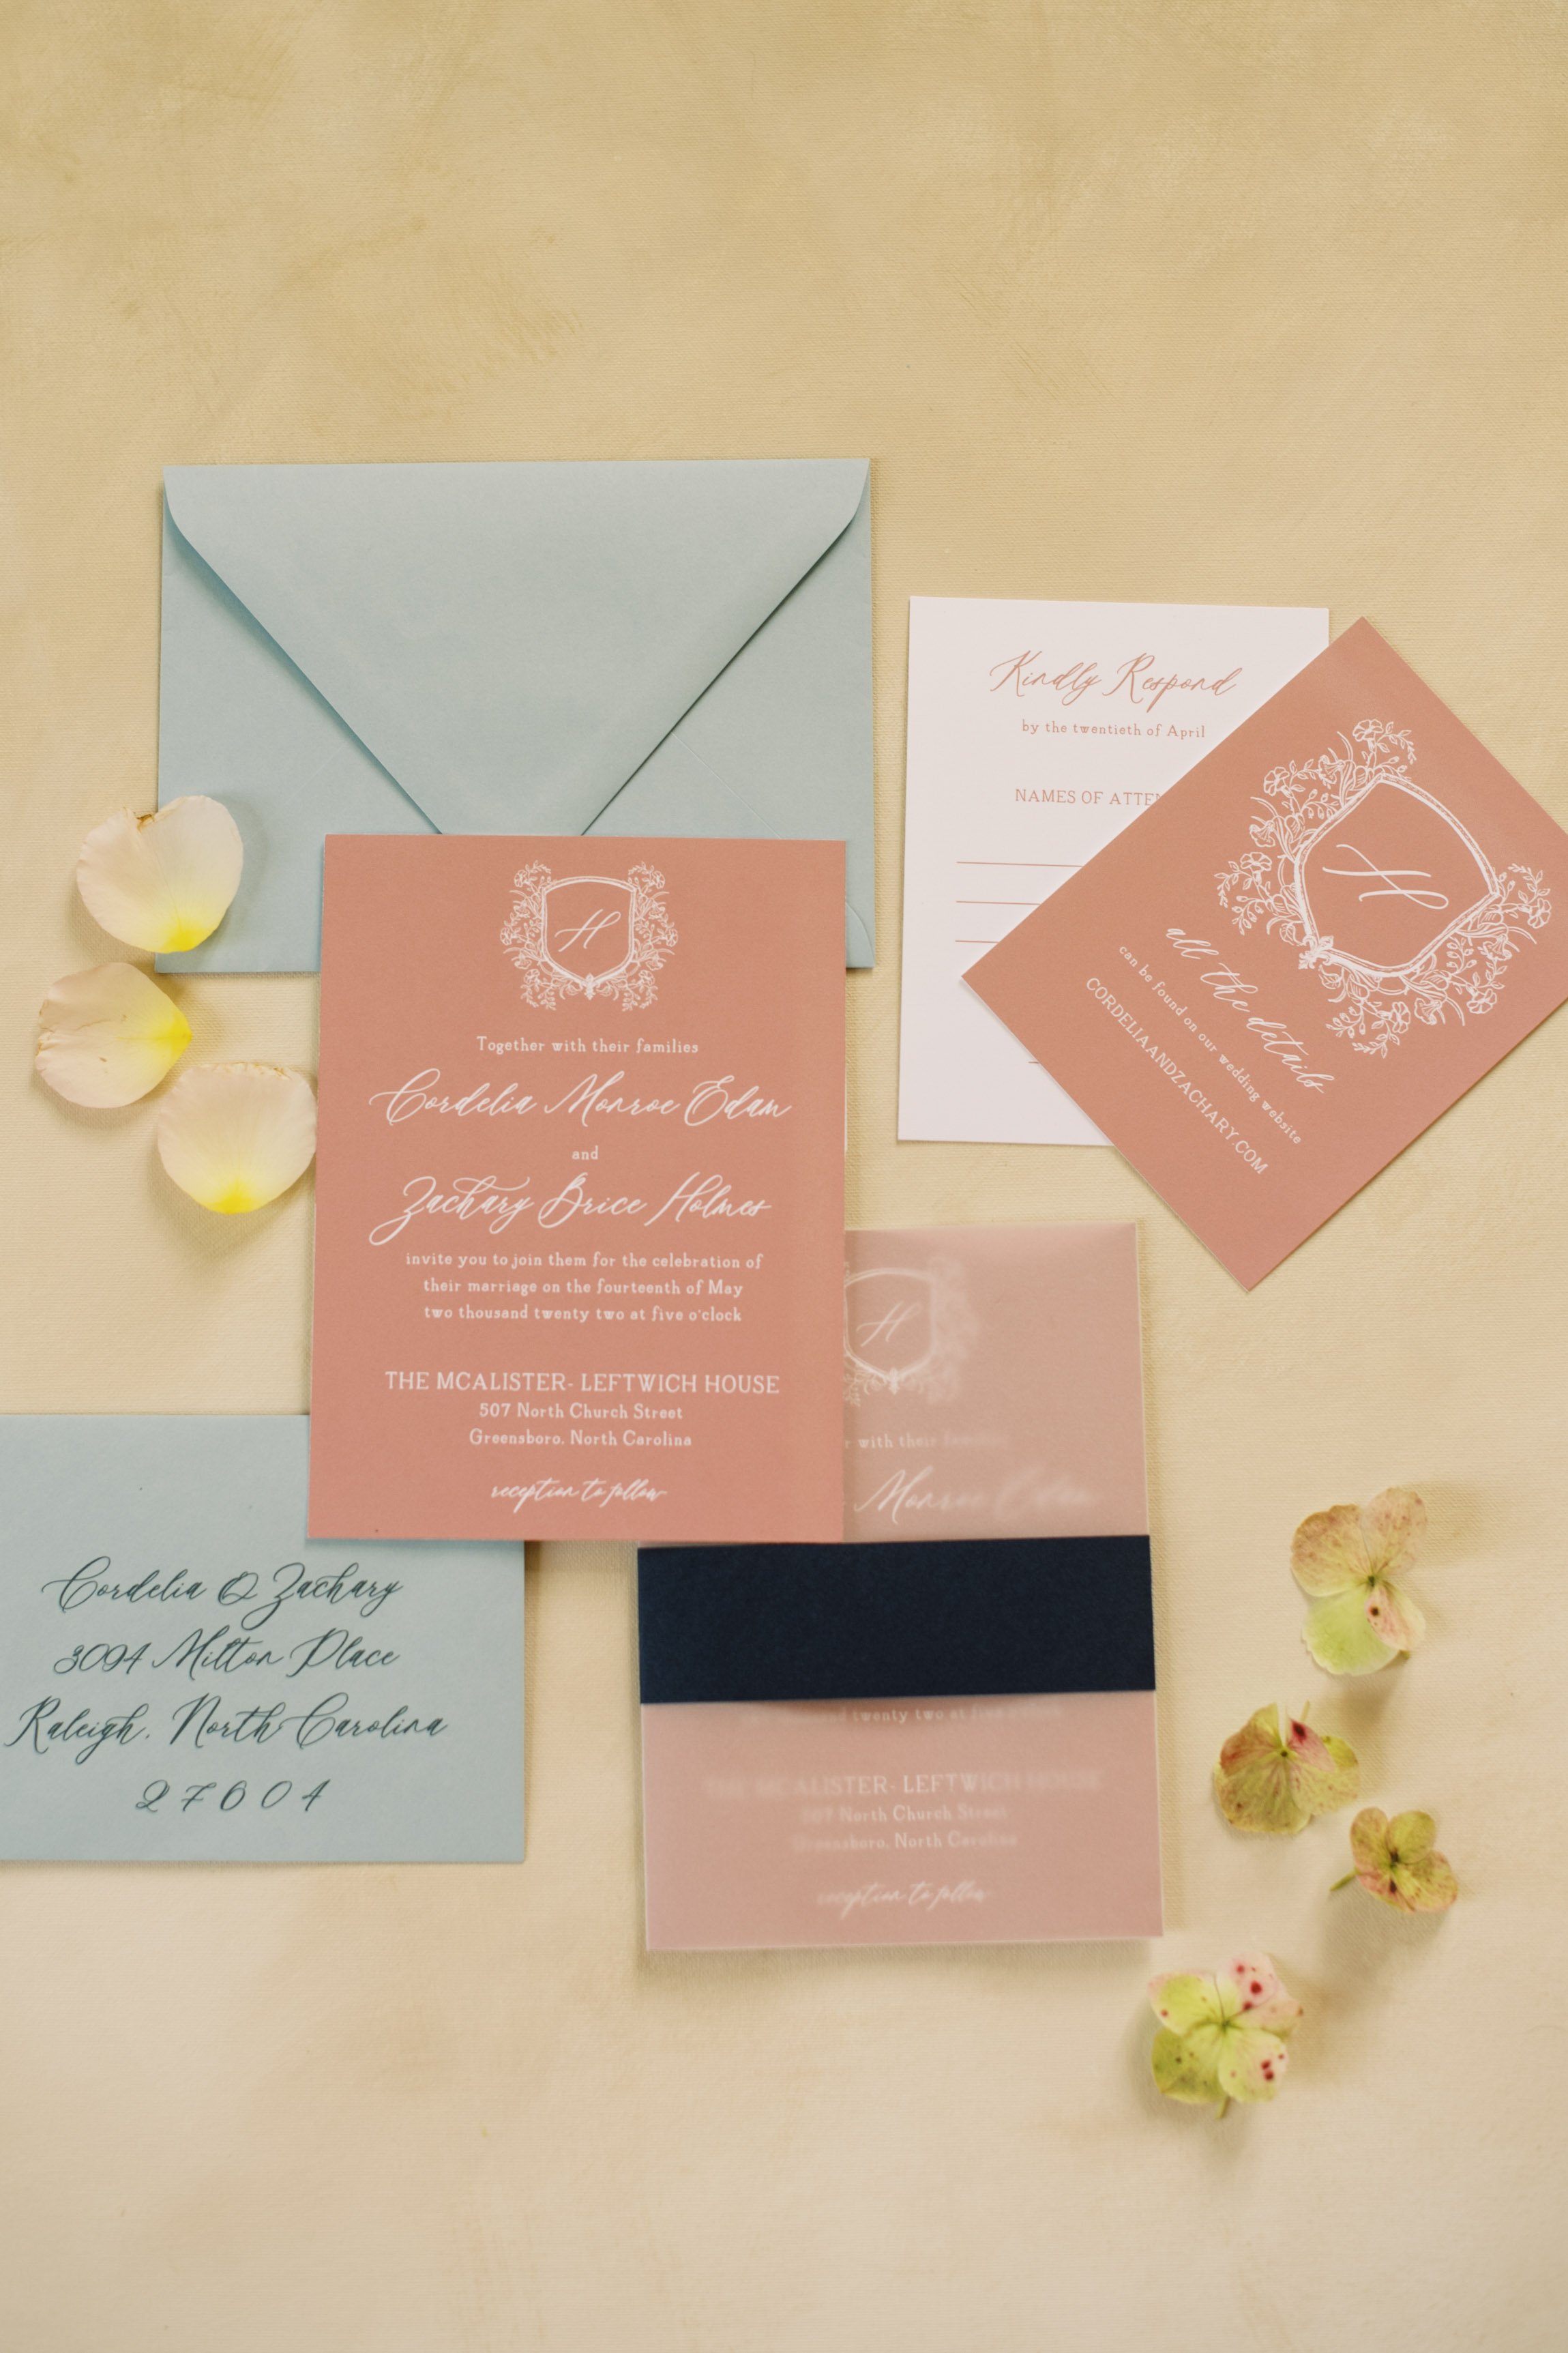 Wedding Invitations The McAlister-Leftwich House Wedding Venue Fancy This Photography